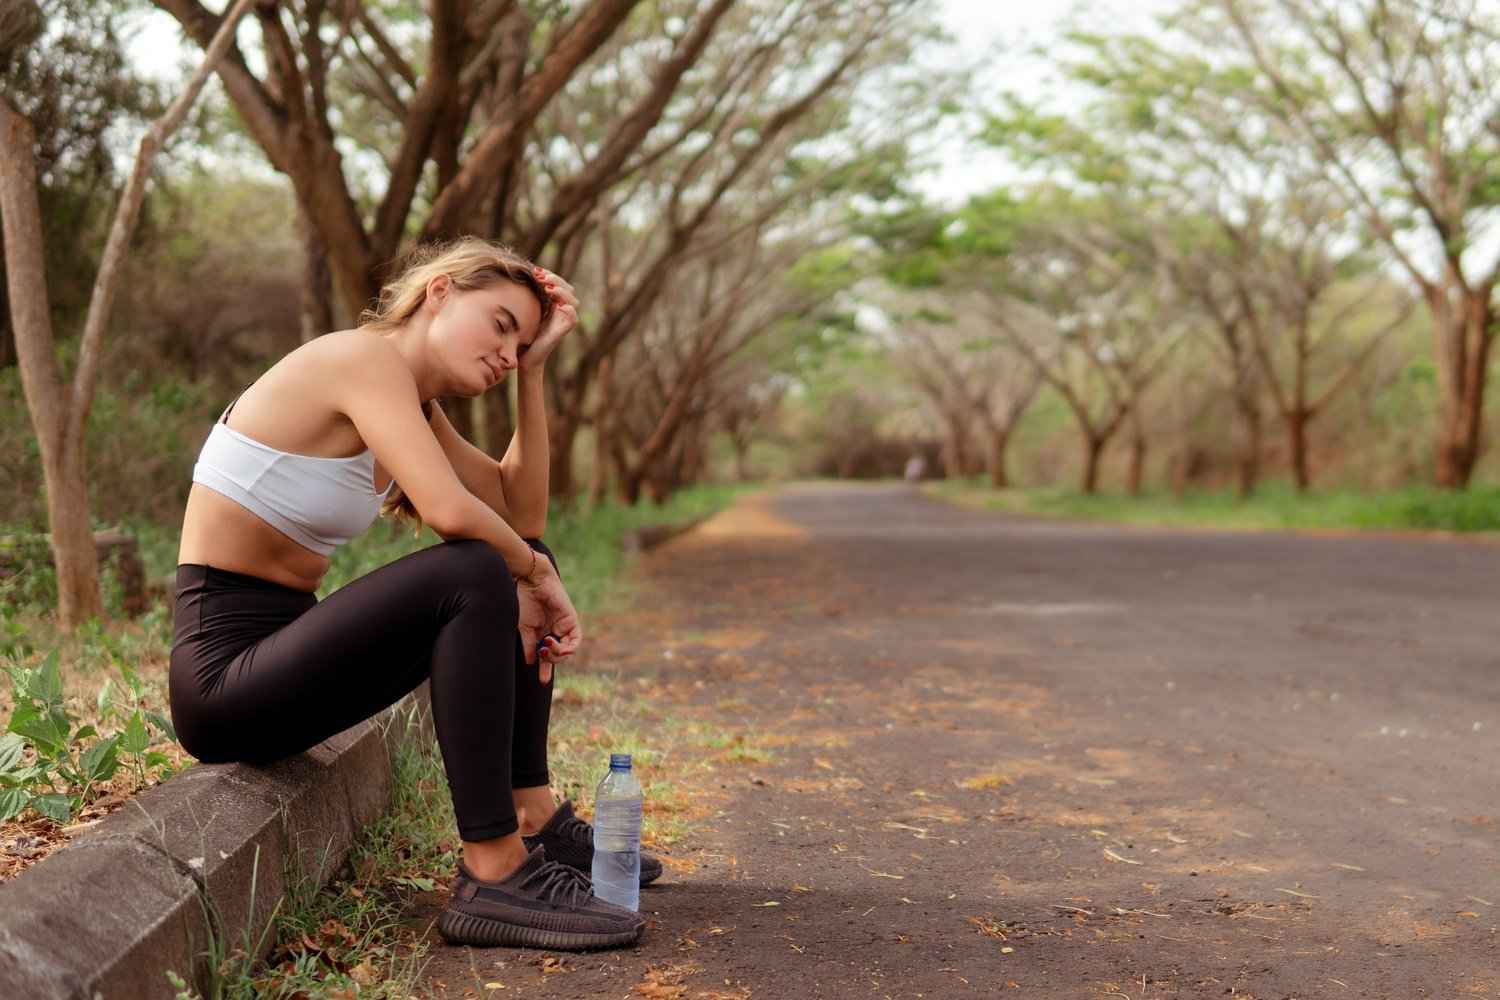 Dehydrated can lead to chills and goosebumps while running